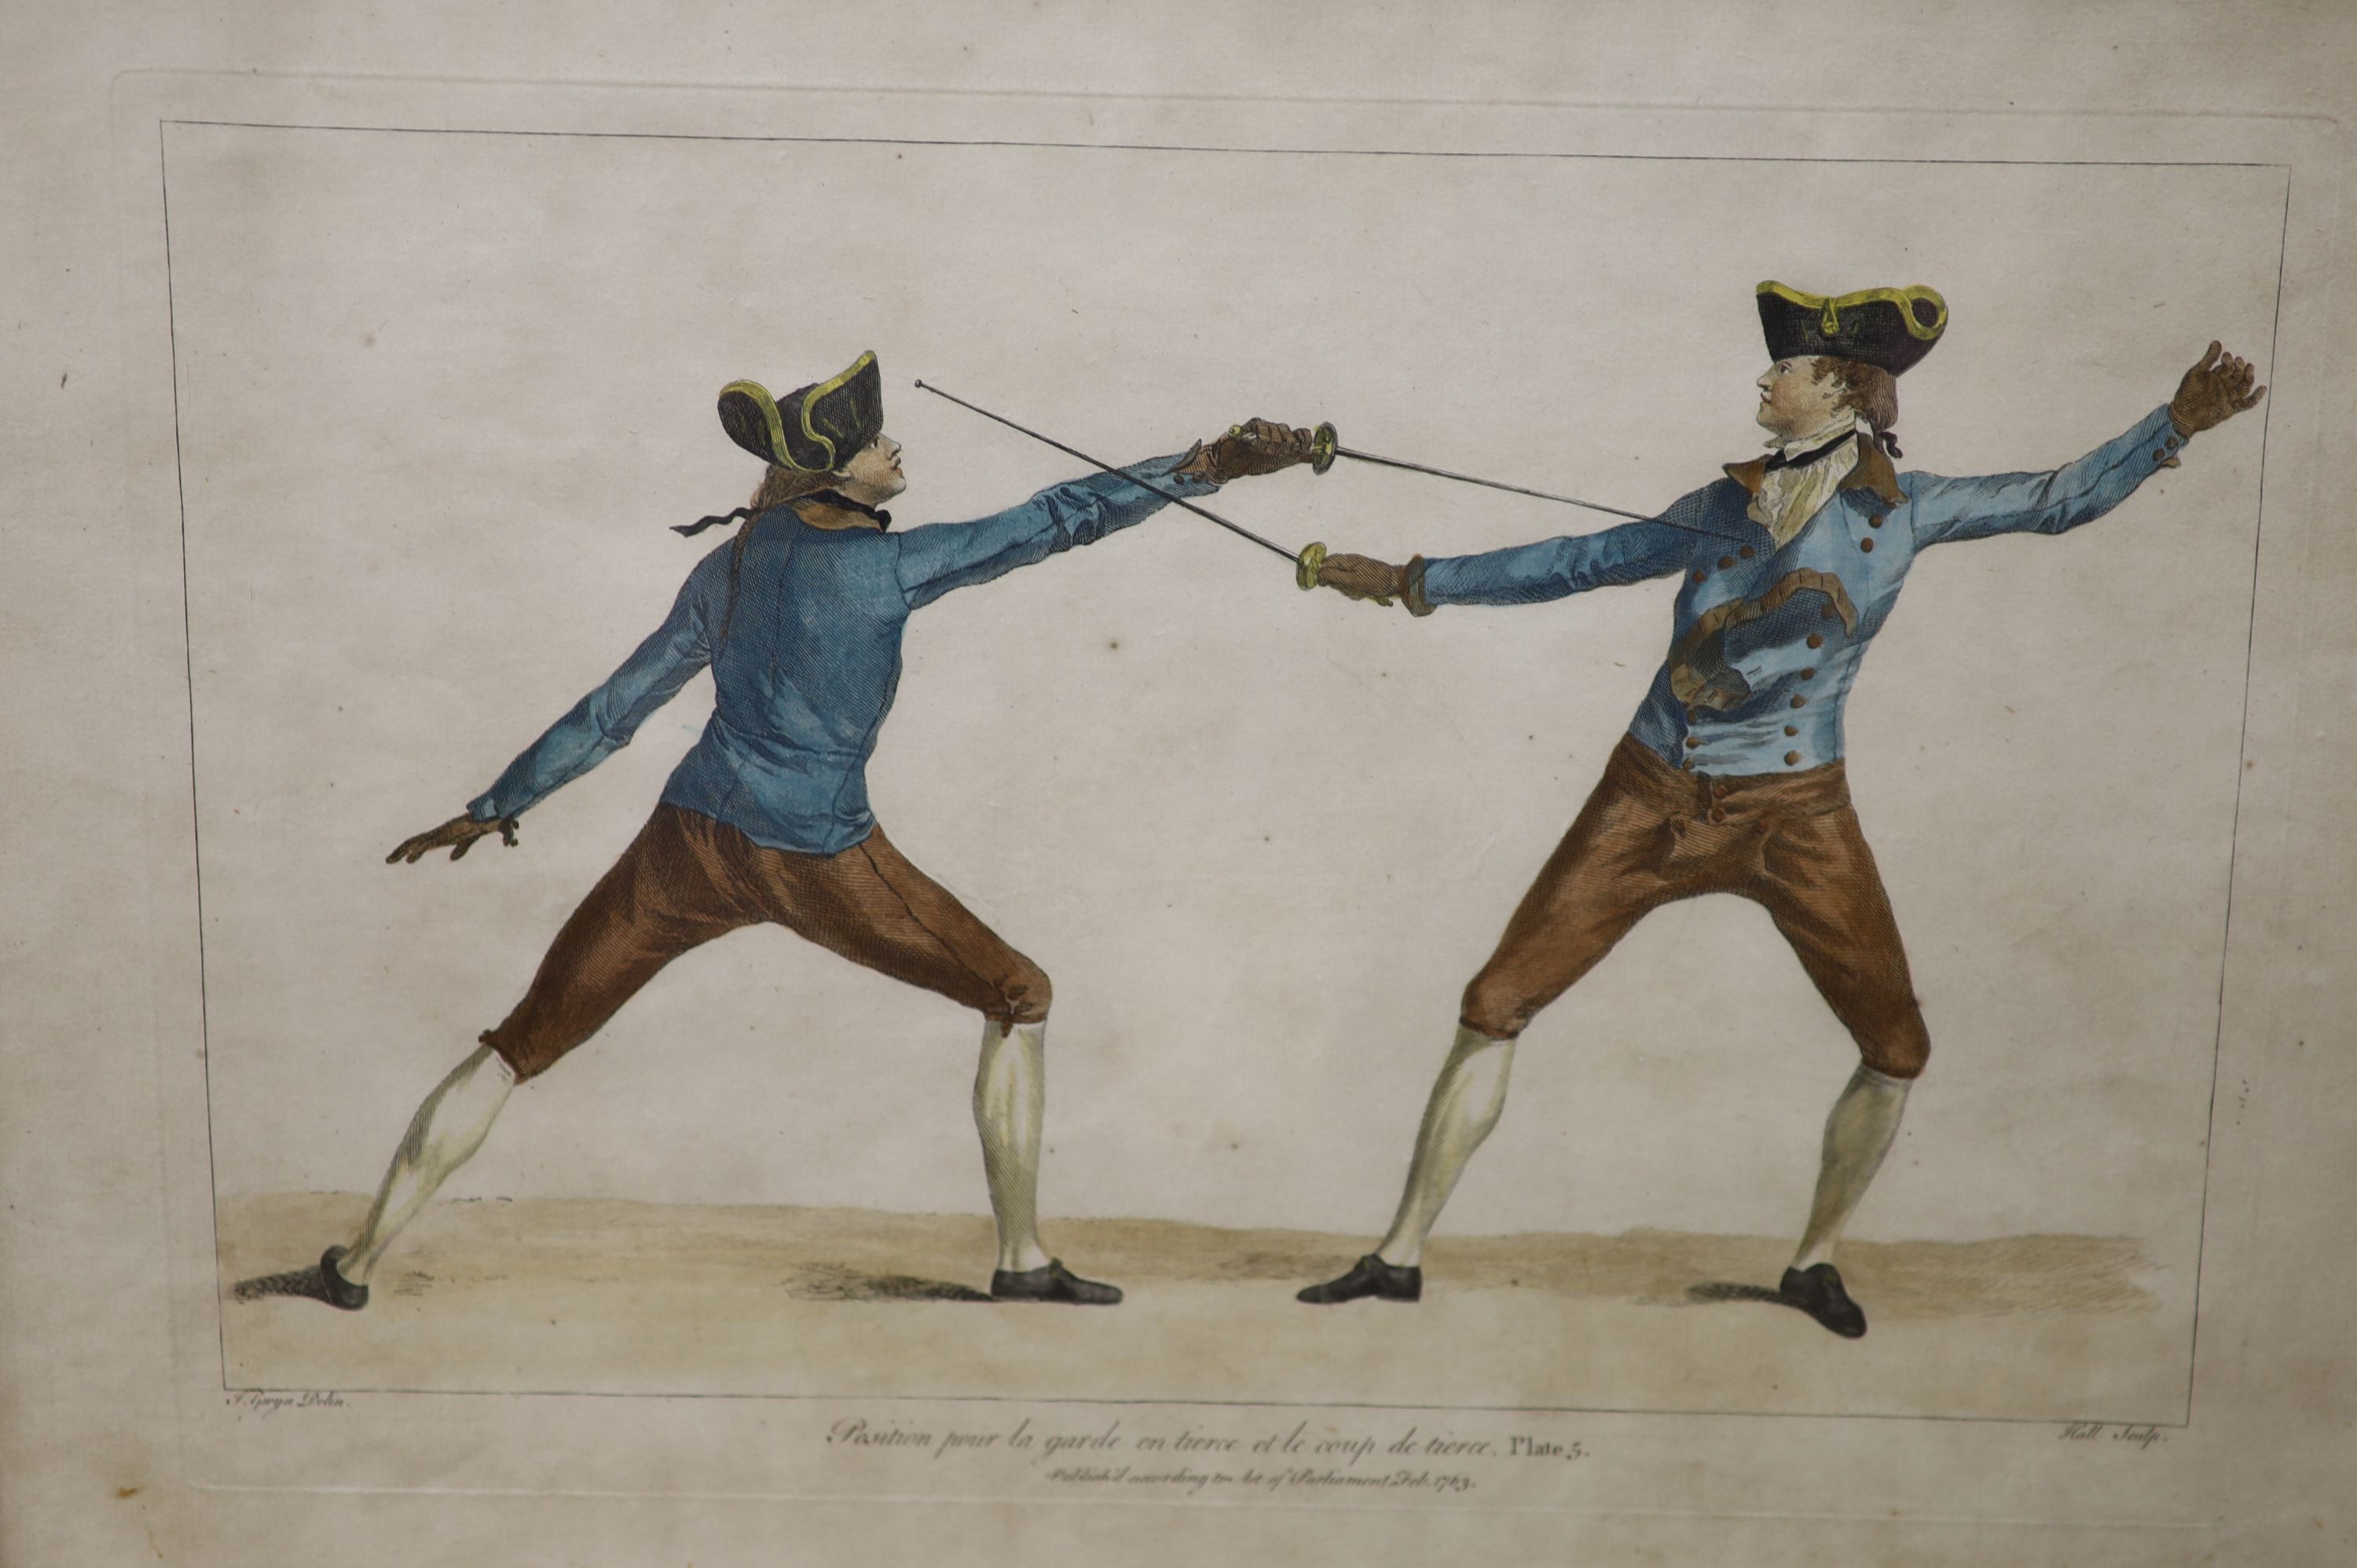 After J. Gruya, three coloured engravings, Fencing Positions, Plates 5, 9 and 40, 42 x 46cm, maple framed